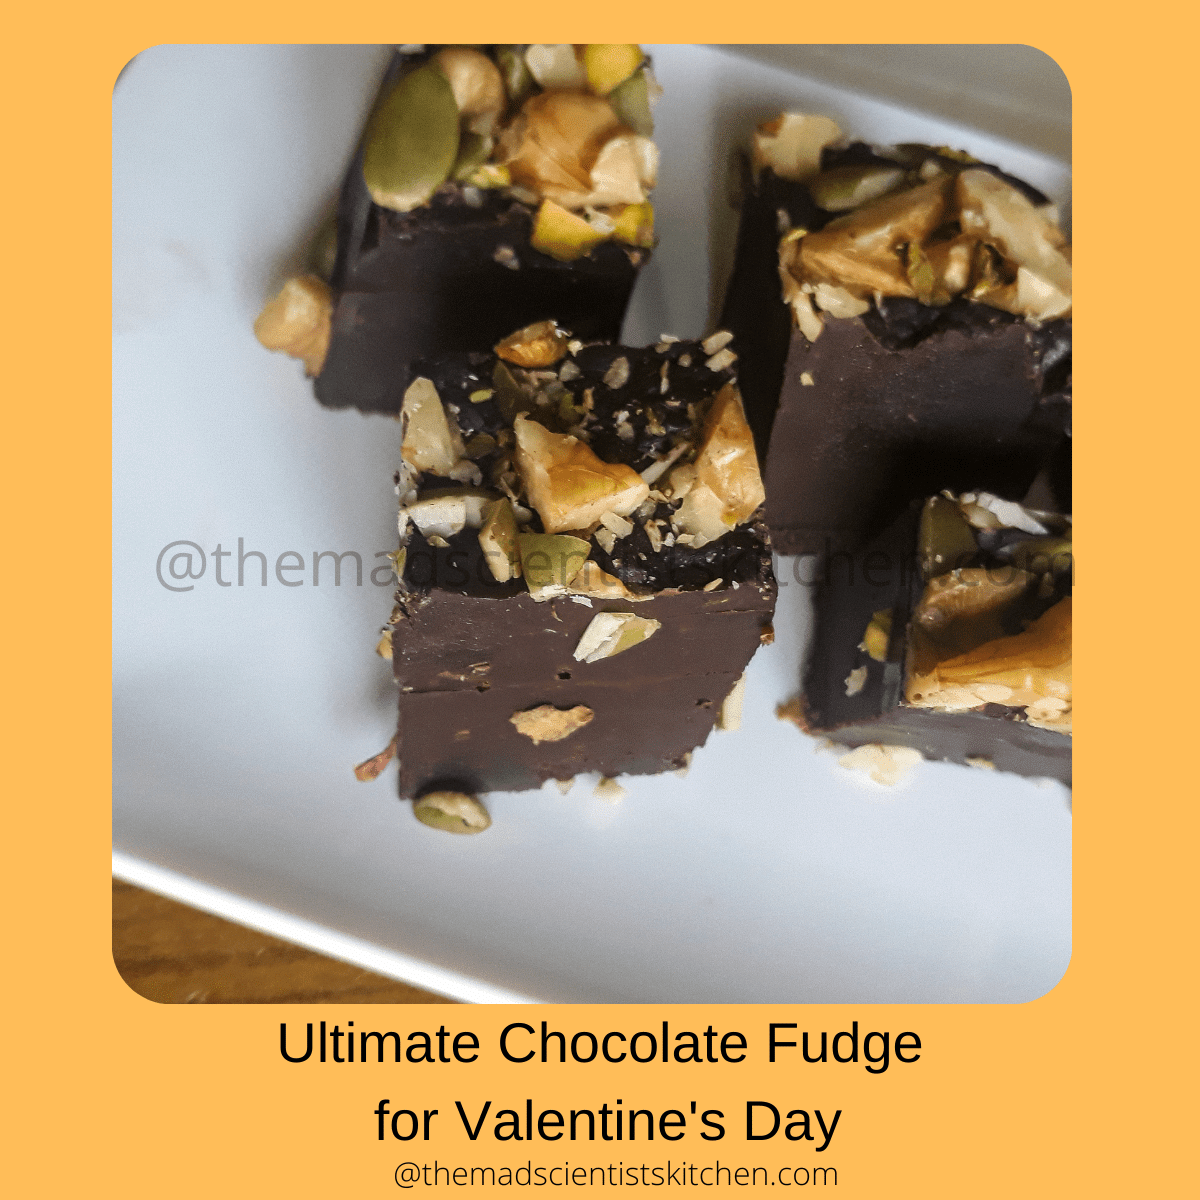 Make some Chocolate Fudge as a gift for Valentine's Day